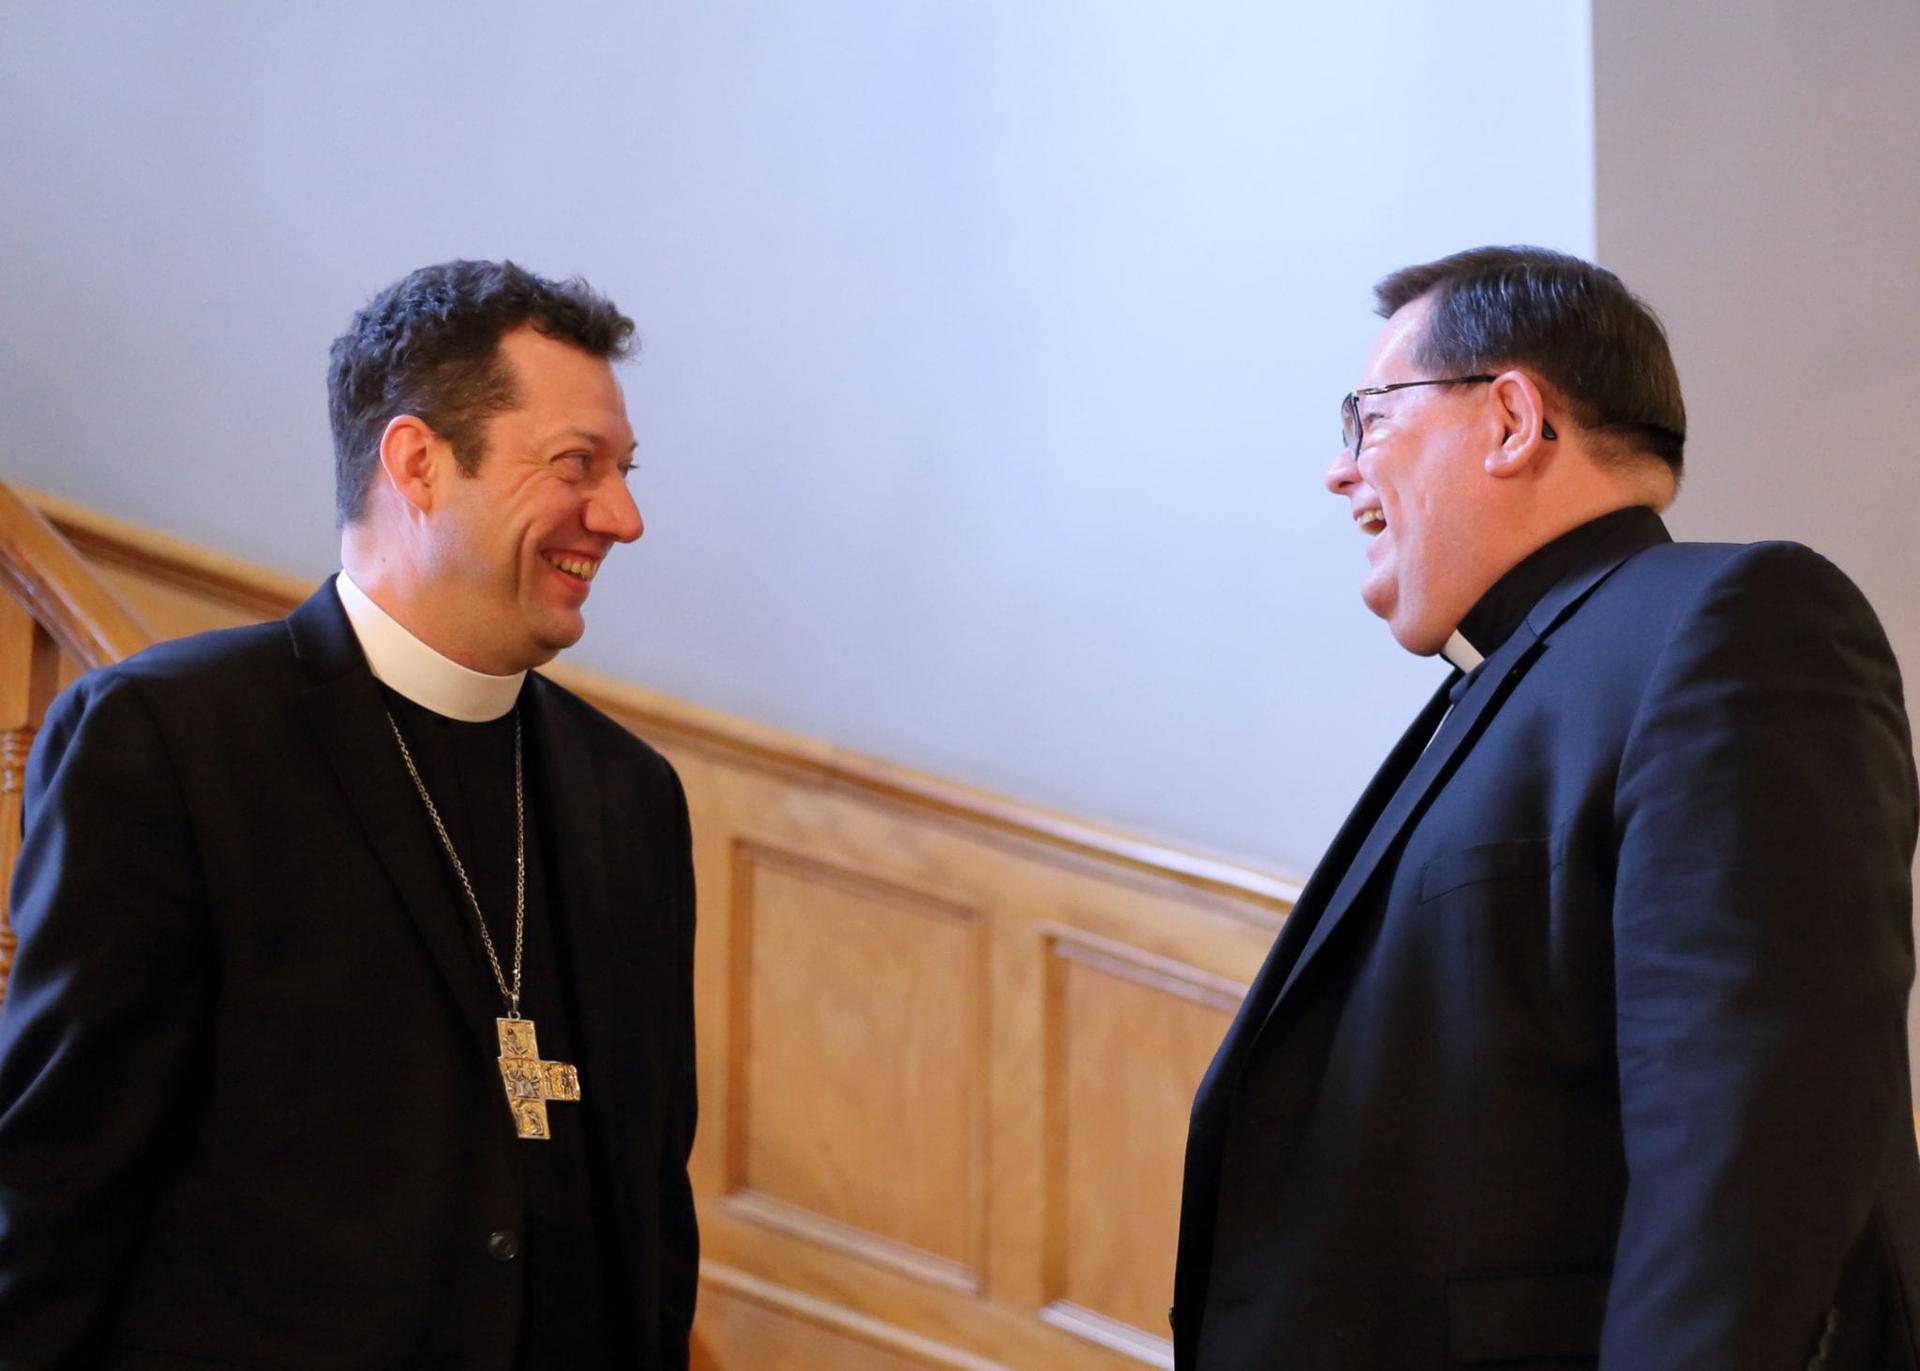 Roommates: Quebec cardinal, Anglican bishop shared same roof for a year